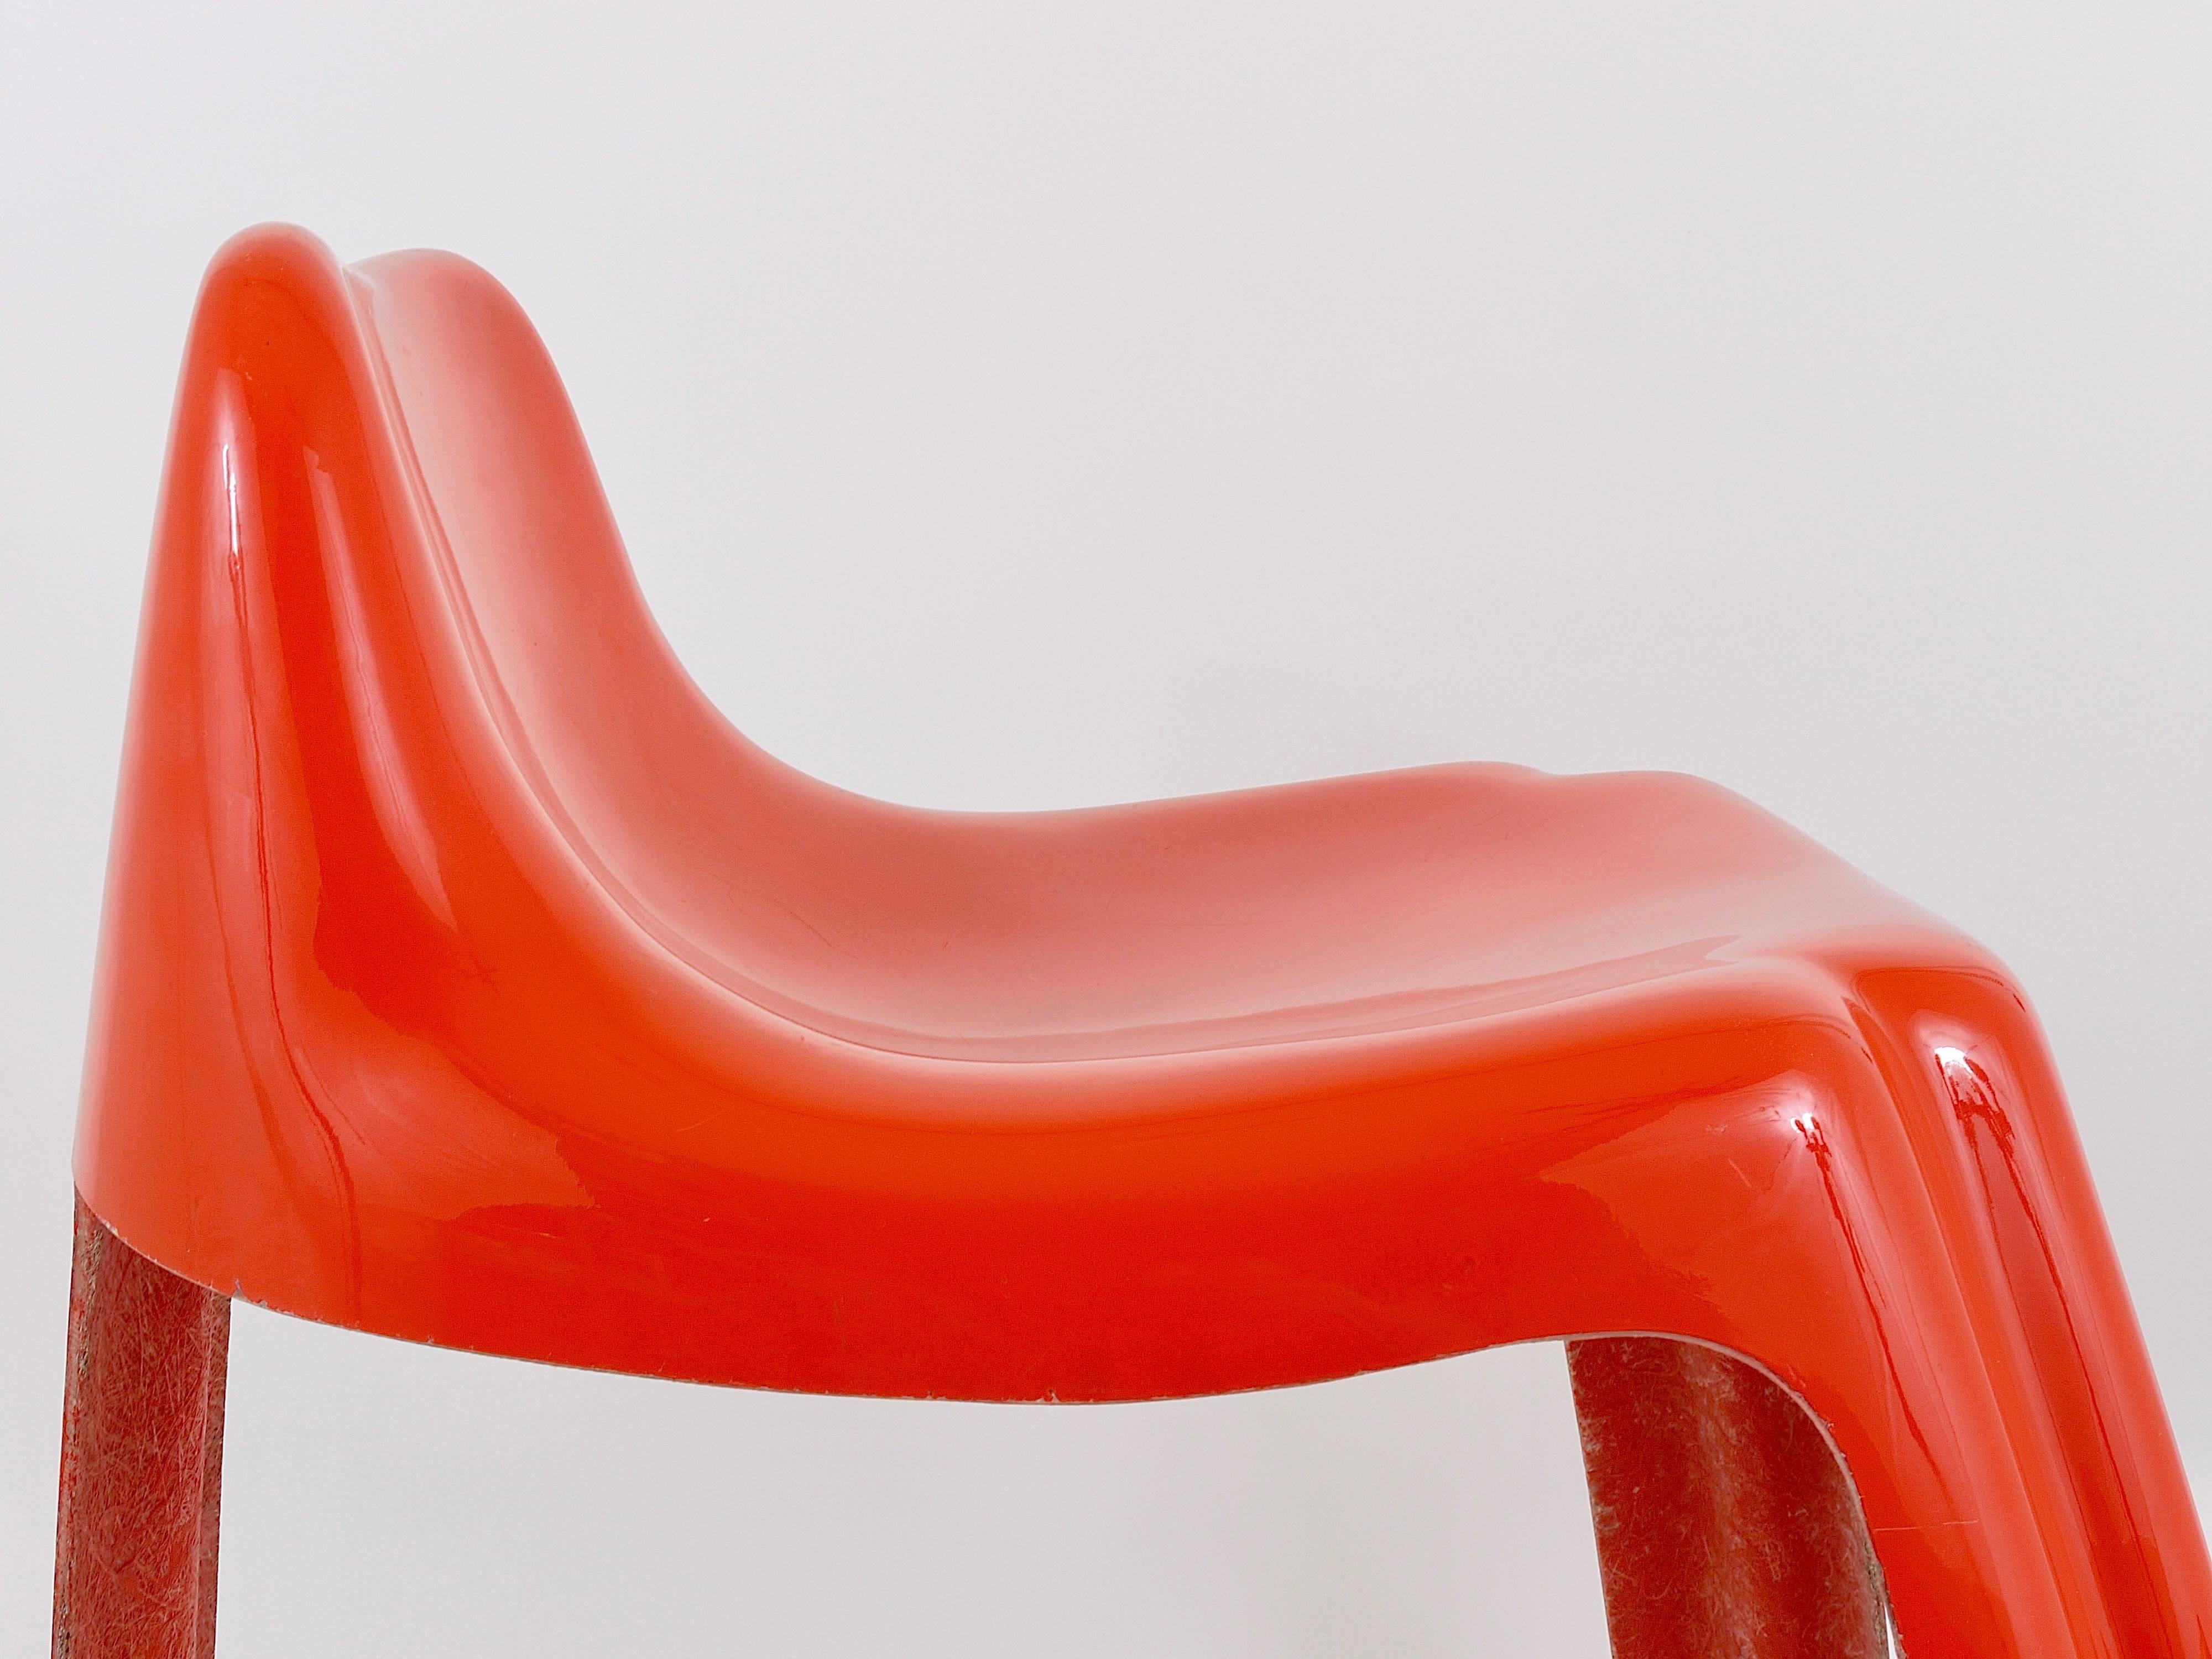 A beautiful orange midcentury stool or chair from the 1970s, made of lacquered fibreglass, model Ginger, by Patrick Gingembre for Paulus, France. In very good original condition with marginal signs of age.